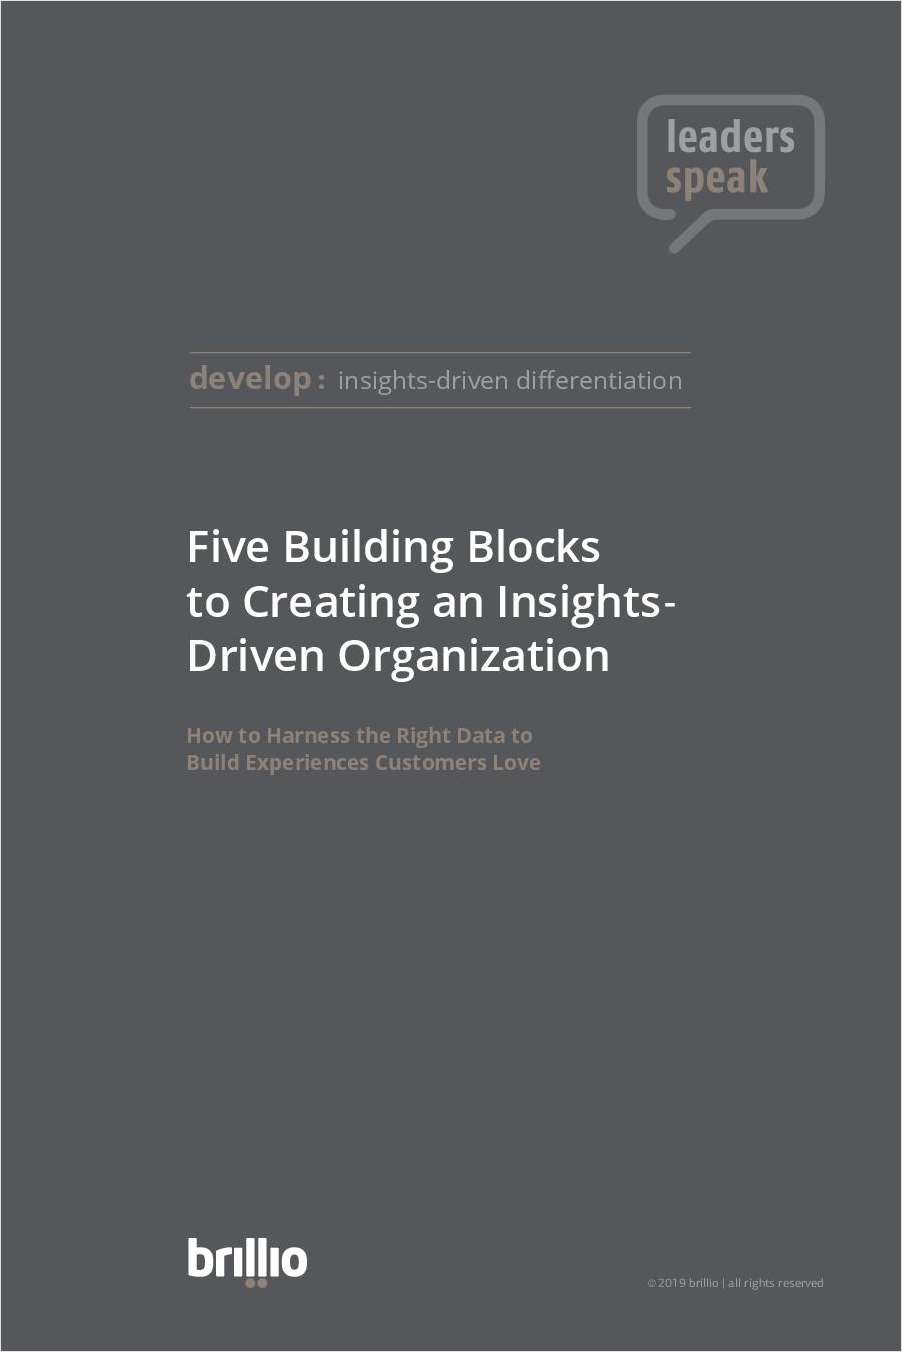 Five Building Blocks to Creating an Insights-Driven Organization